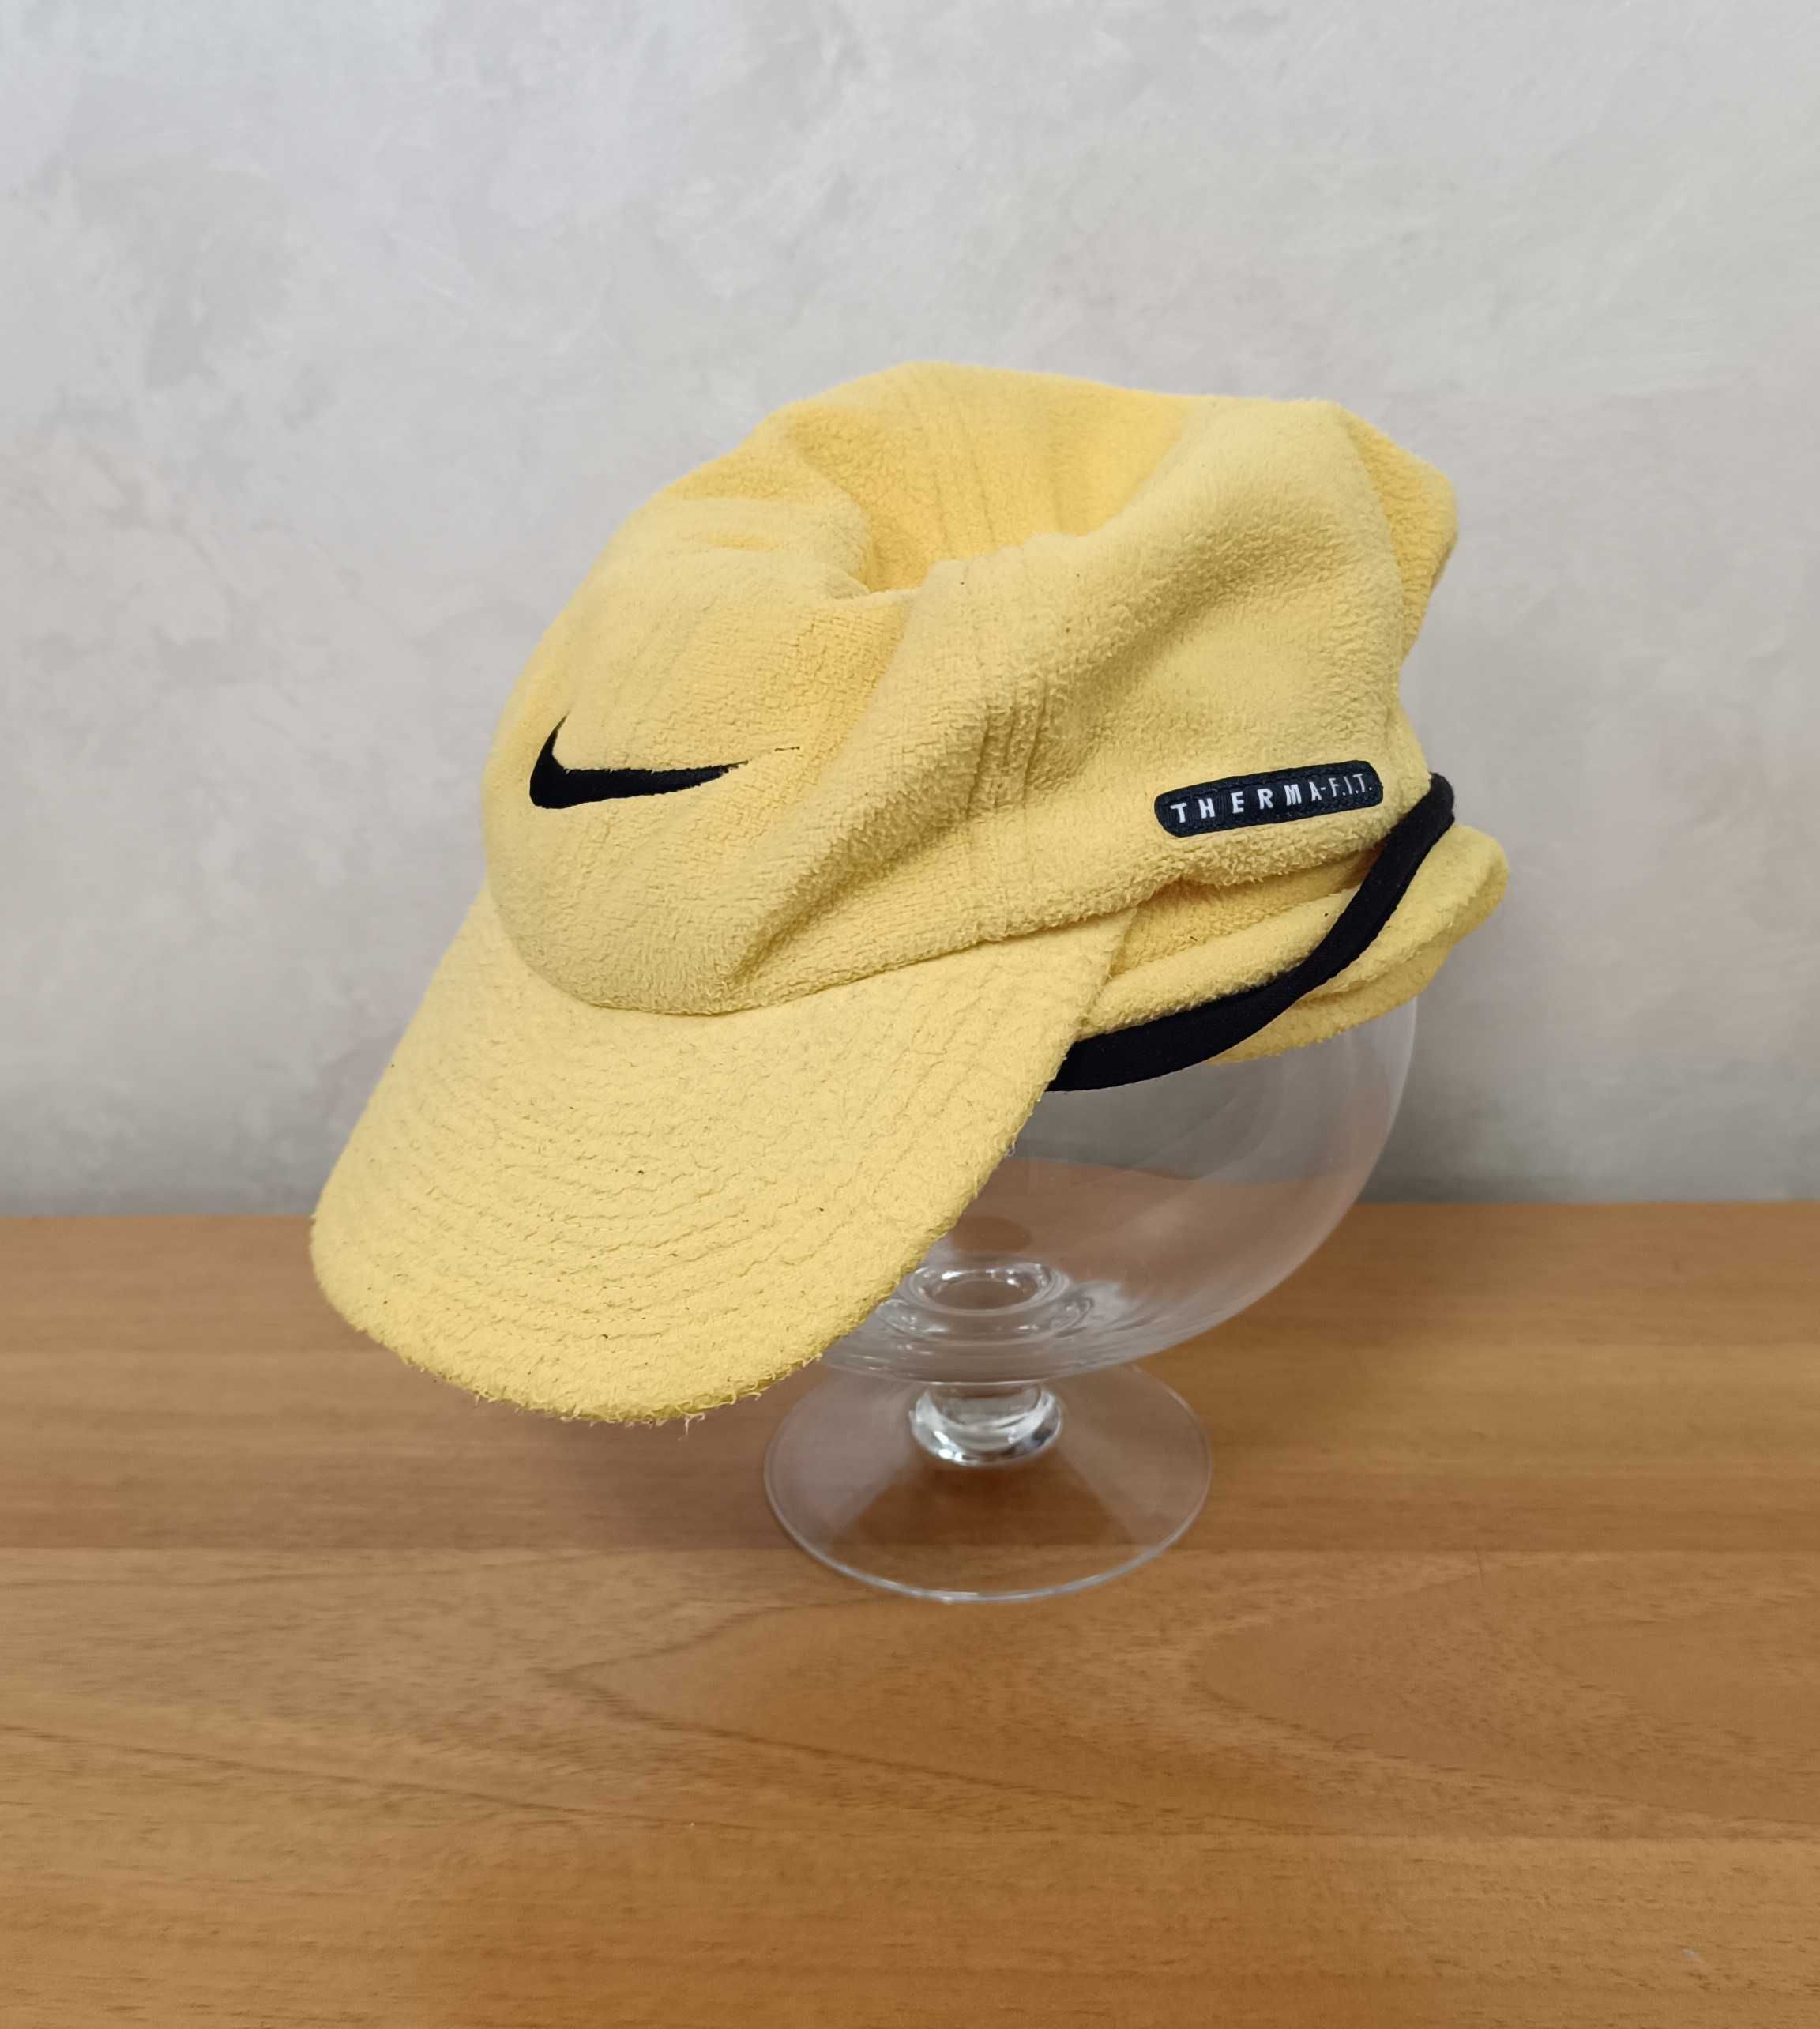 Nike-Therma Fit-